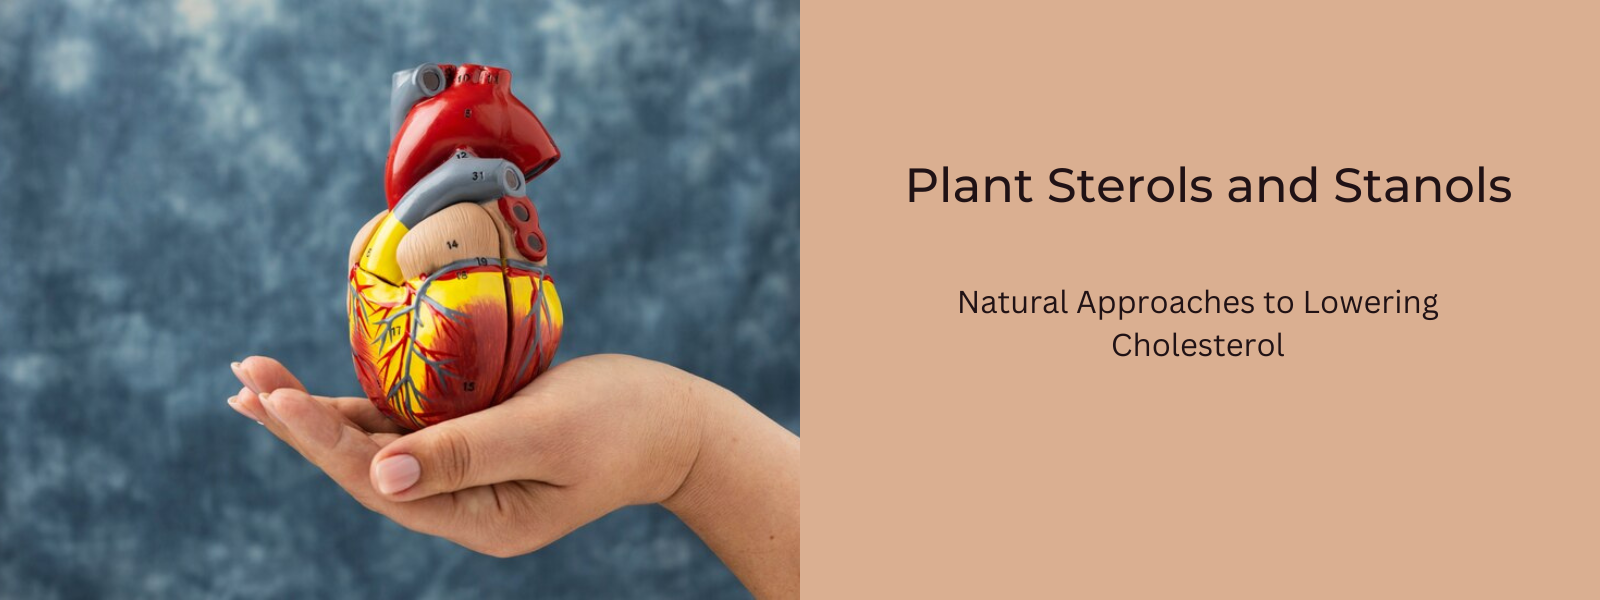 Plant Sterols and Stanols: Natural Approaches to Lowering Cholesterol